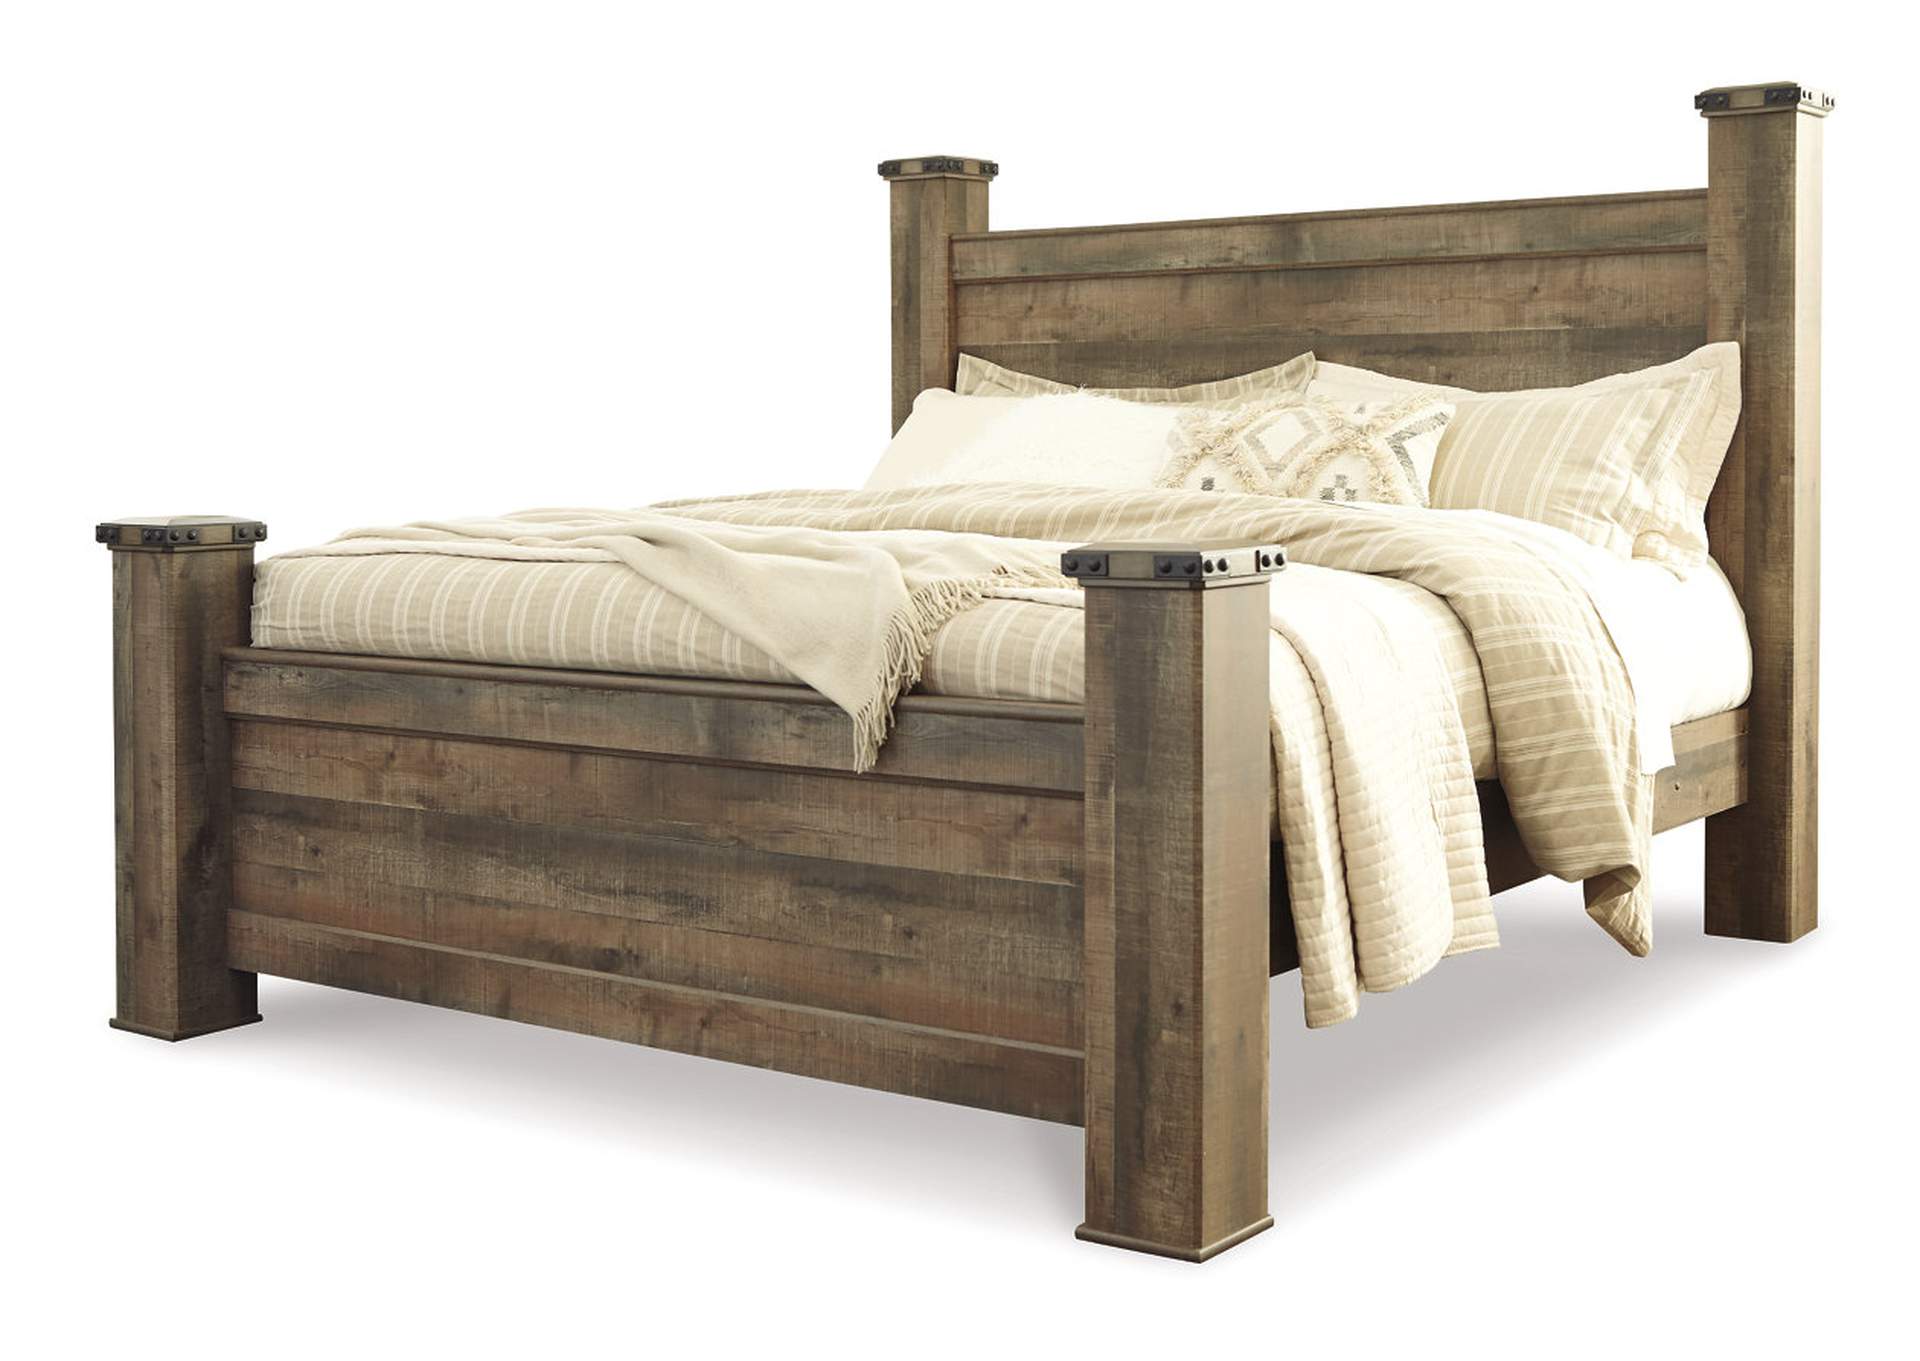 Trinell Queen Poster Bed with Dresser,Signature Design By Ashley